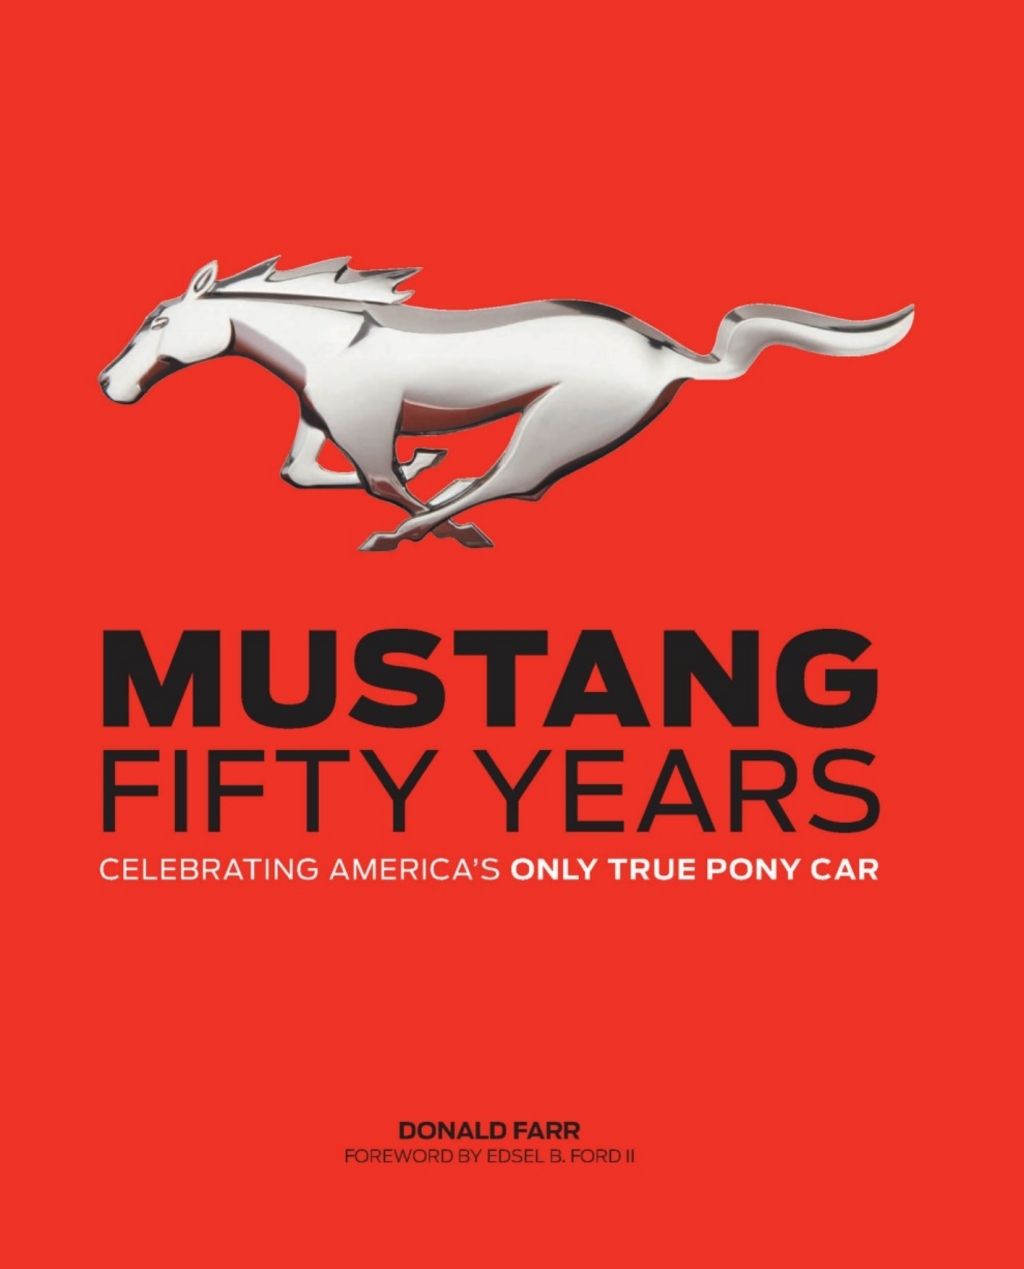 Mustang: Fifty Years (eBook) - Donald Farr,